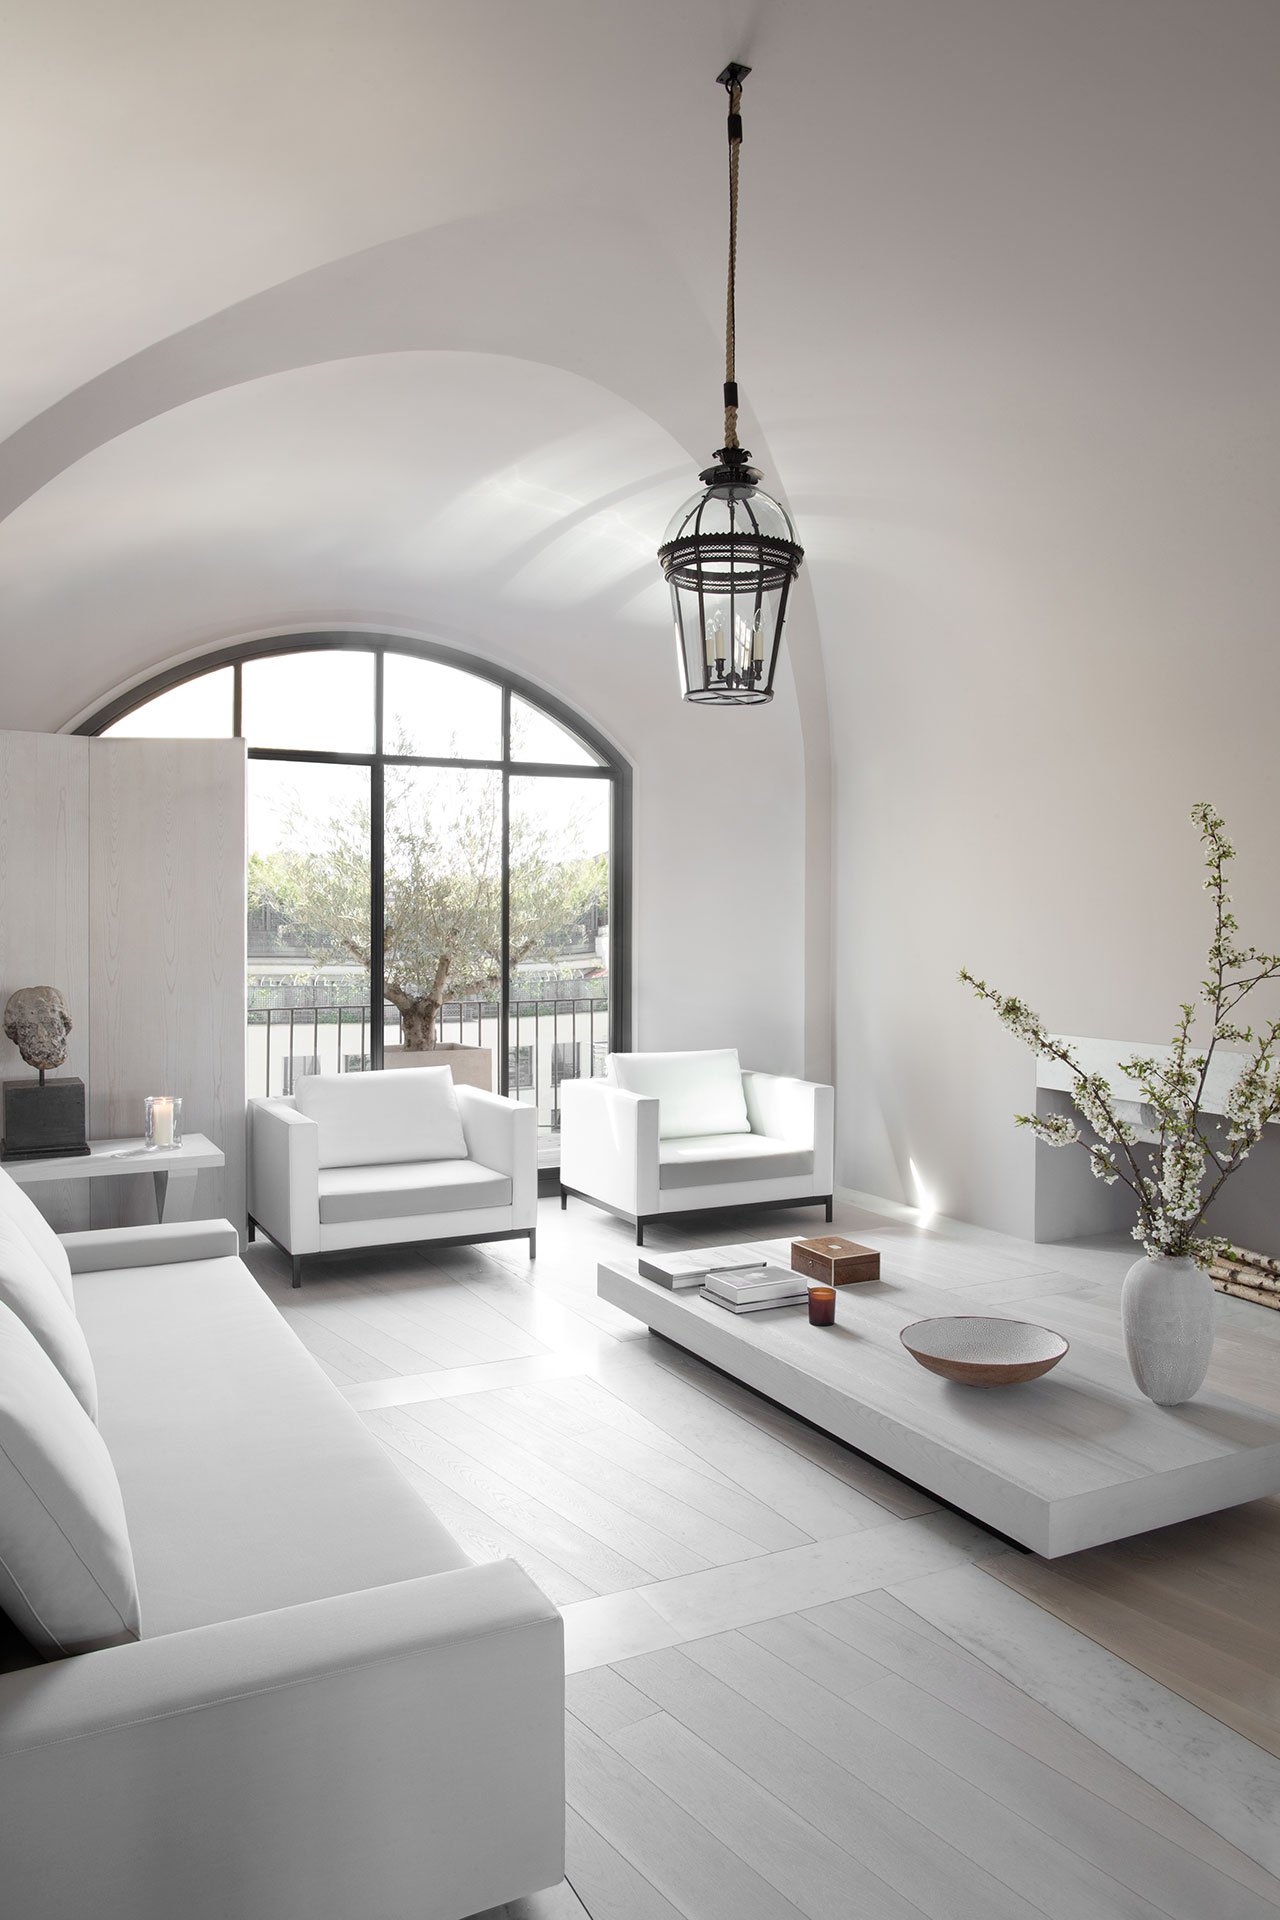 The living room is a light filled space with white furniture and much light coming through an arched window